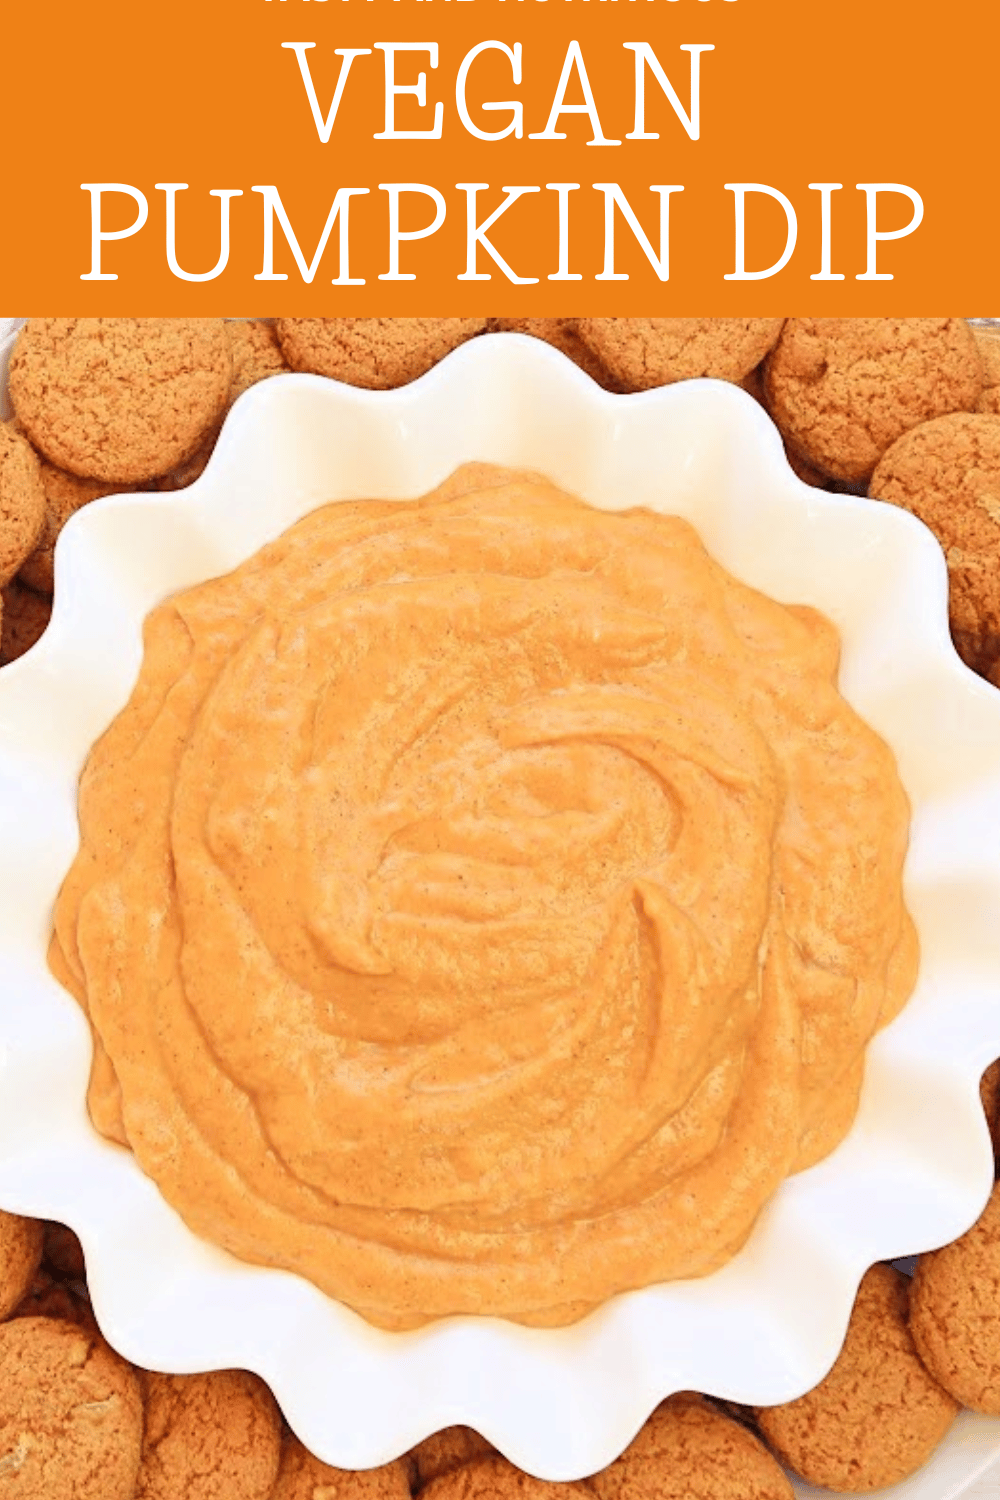 Pumpkin Dip ~ Vegan Recipe ~ All the pumpkin pie flavor you love in an easy and creamy no-bake dip! Perfect for Halloween and Thanksgiving! via @thiswifecooks